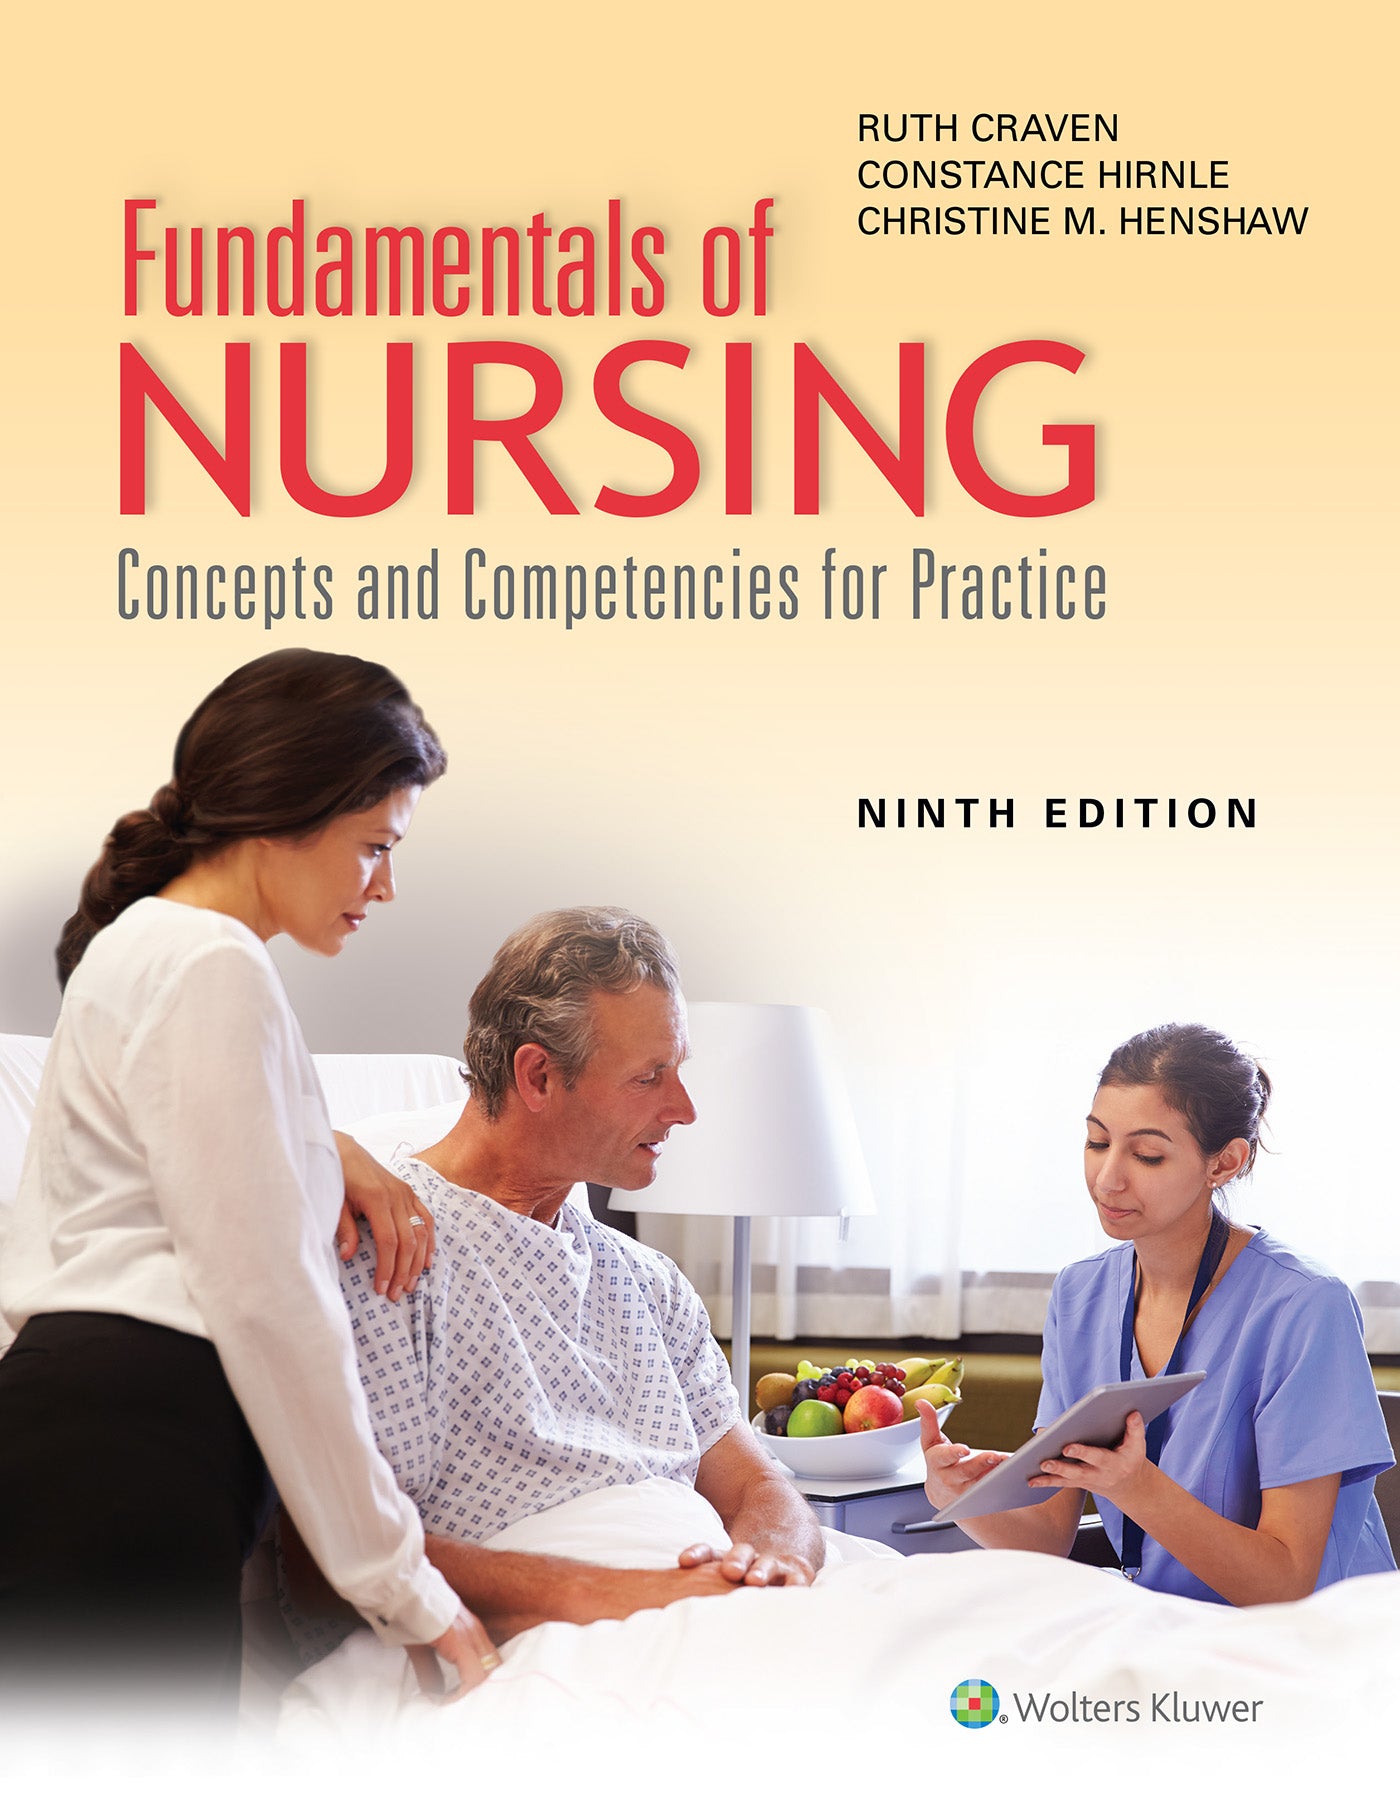 Fundamentals of Nursing: Concepts and Competencies for Practice